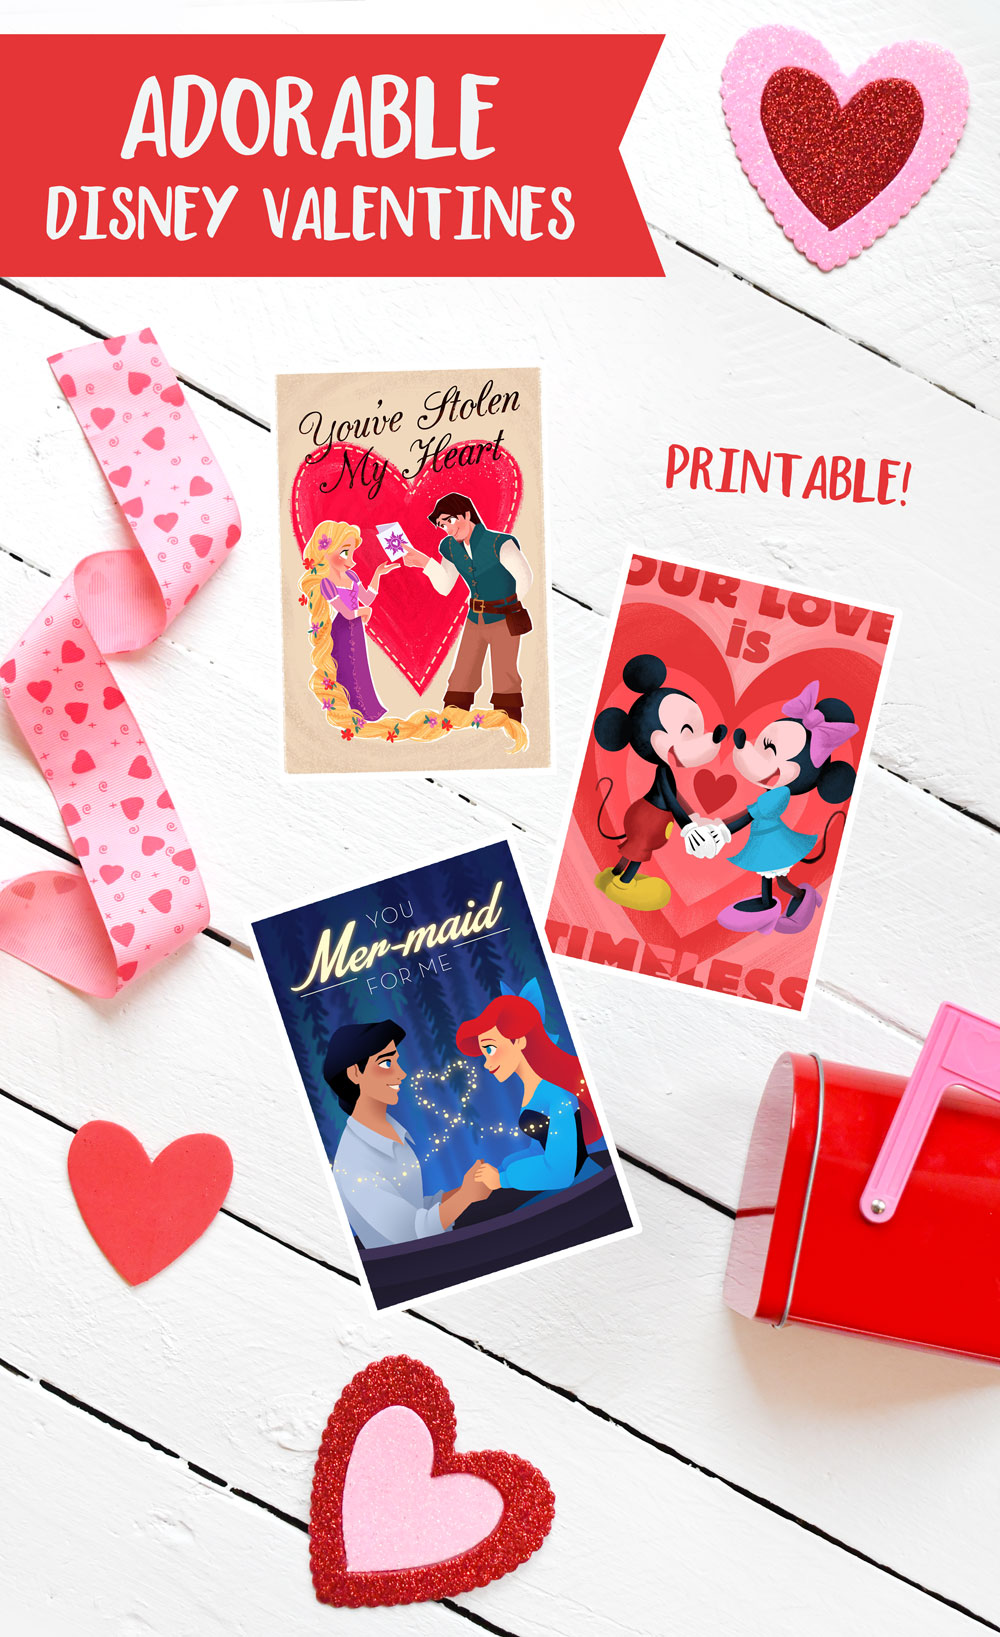 Cute Disney Valentines print and share them